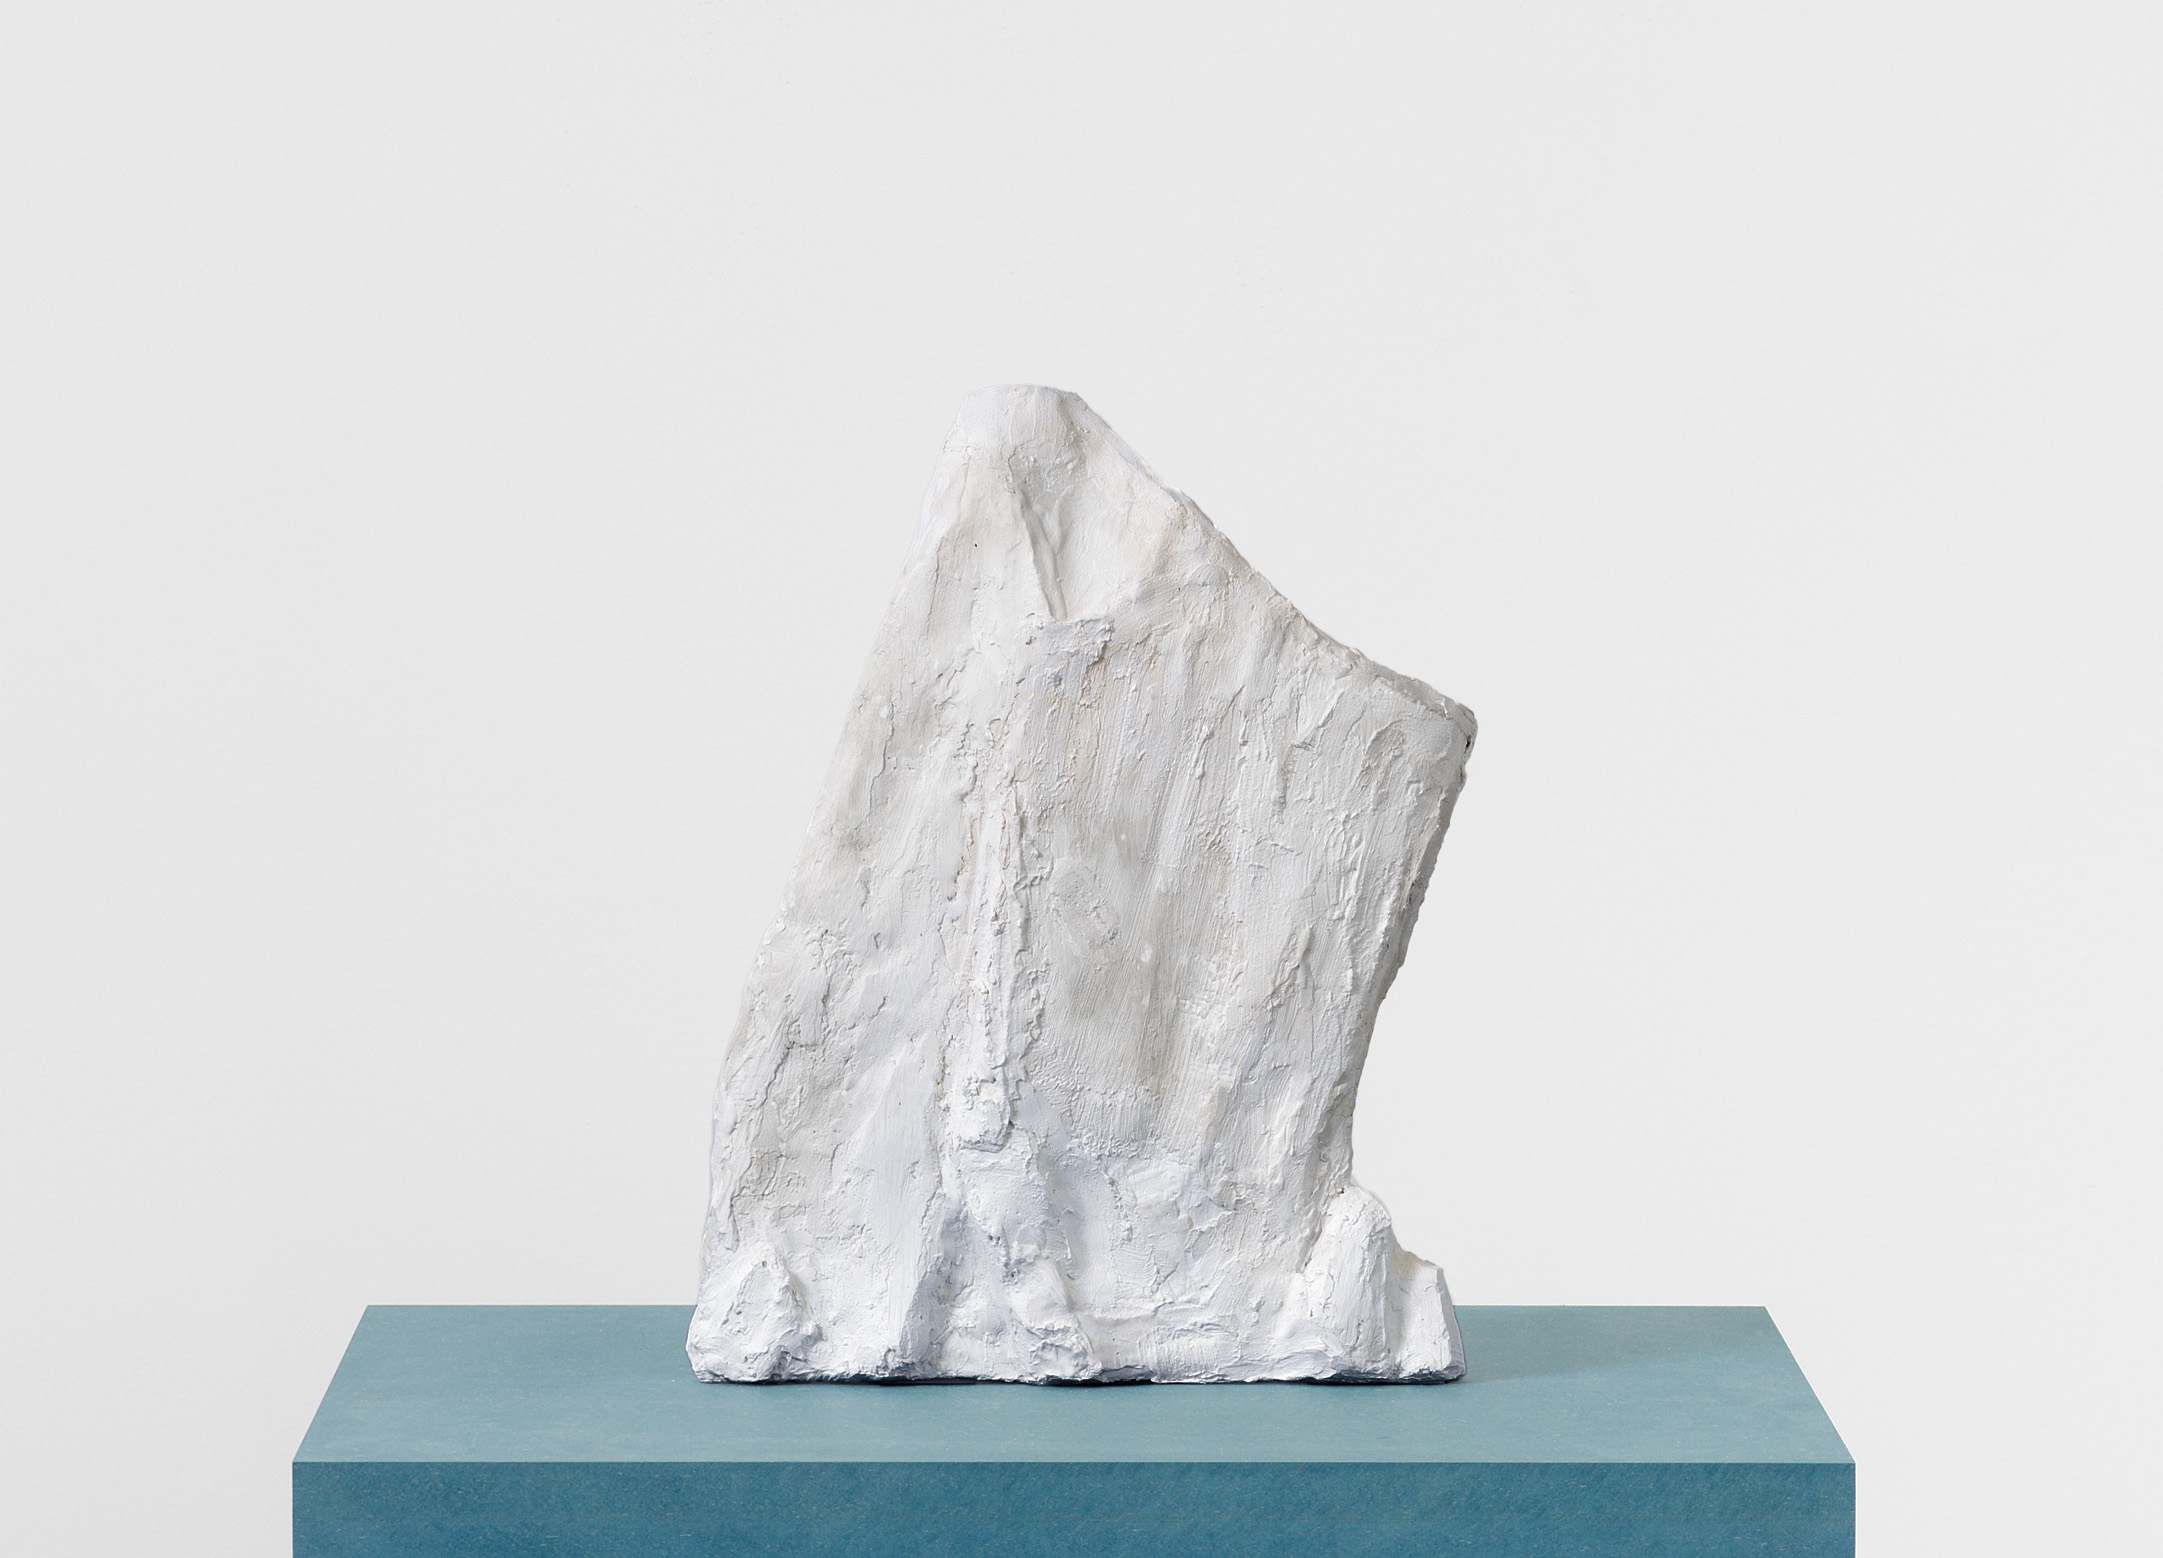 Jennifer Bolande, Drift 1, 2023, Plaster, wood, wire mesh on blue pigmented high-density composite plinth and base, 59 x 20 x 20 in.